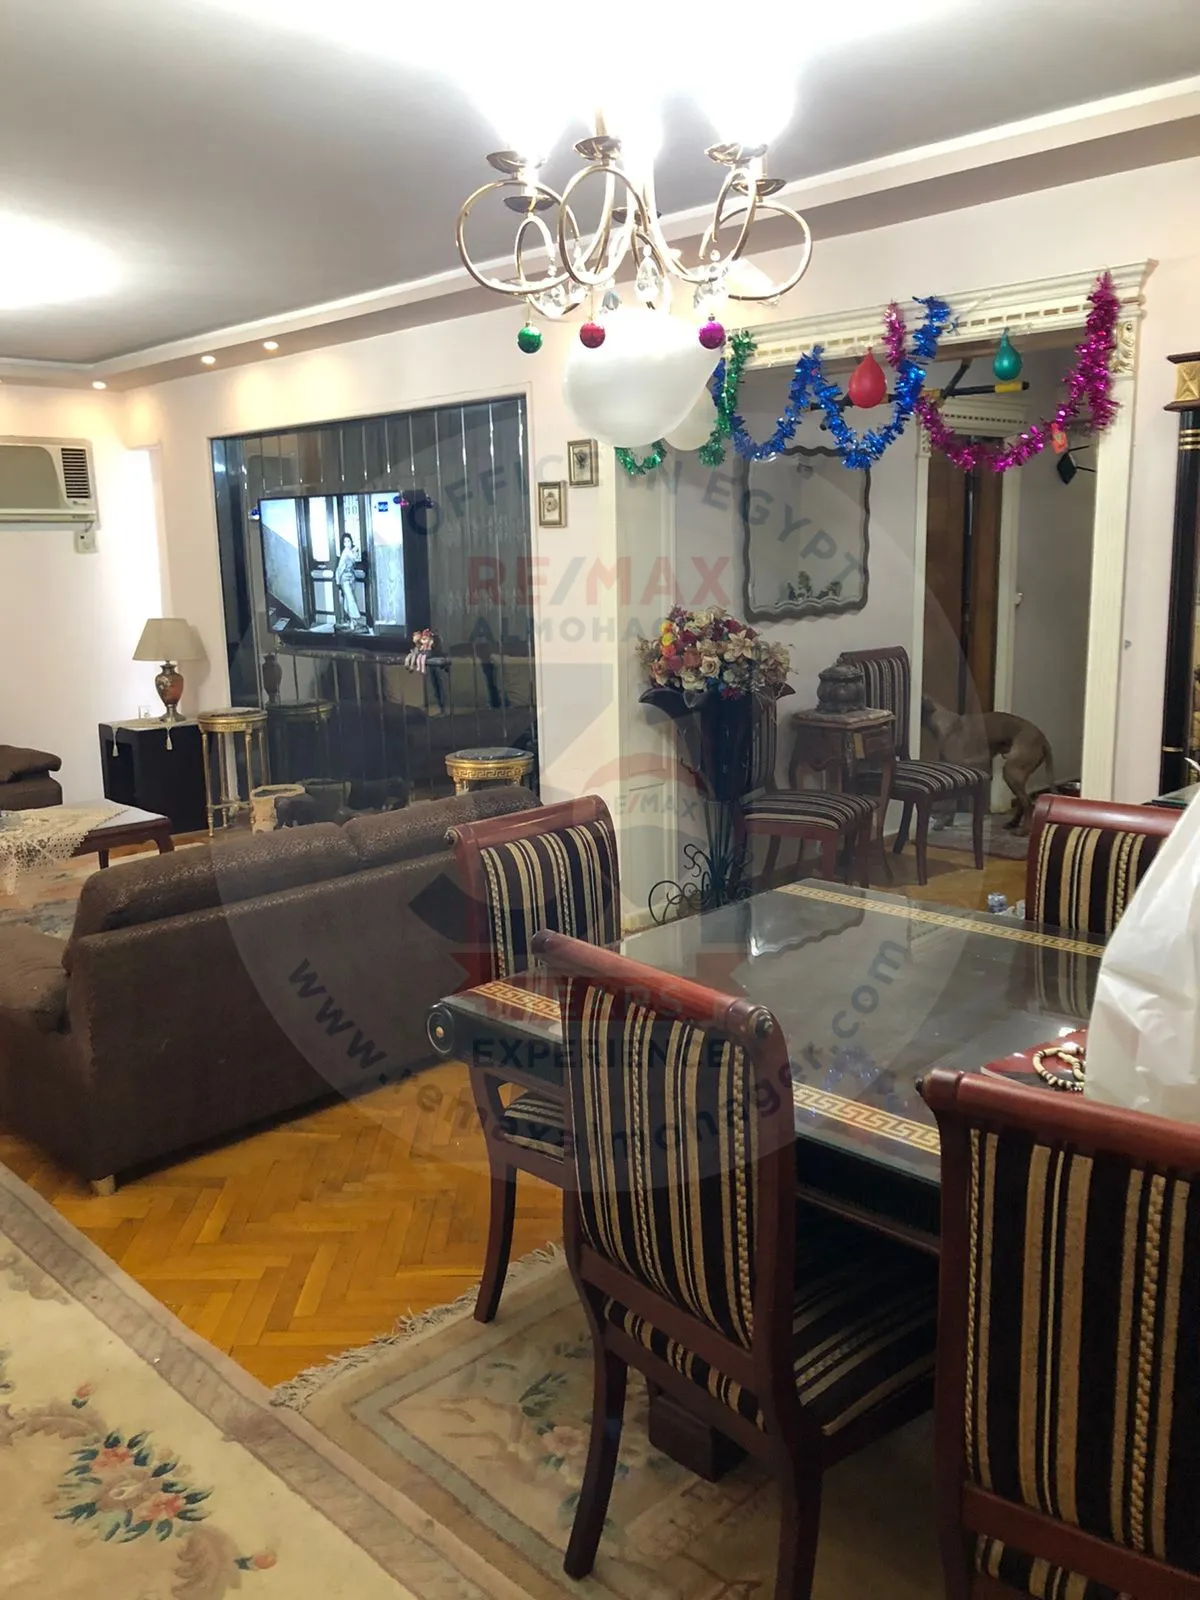 4 Bedrooms apartment for sale in Nasr City